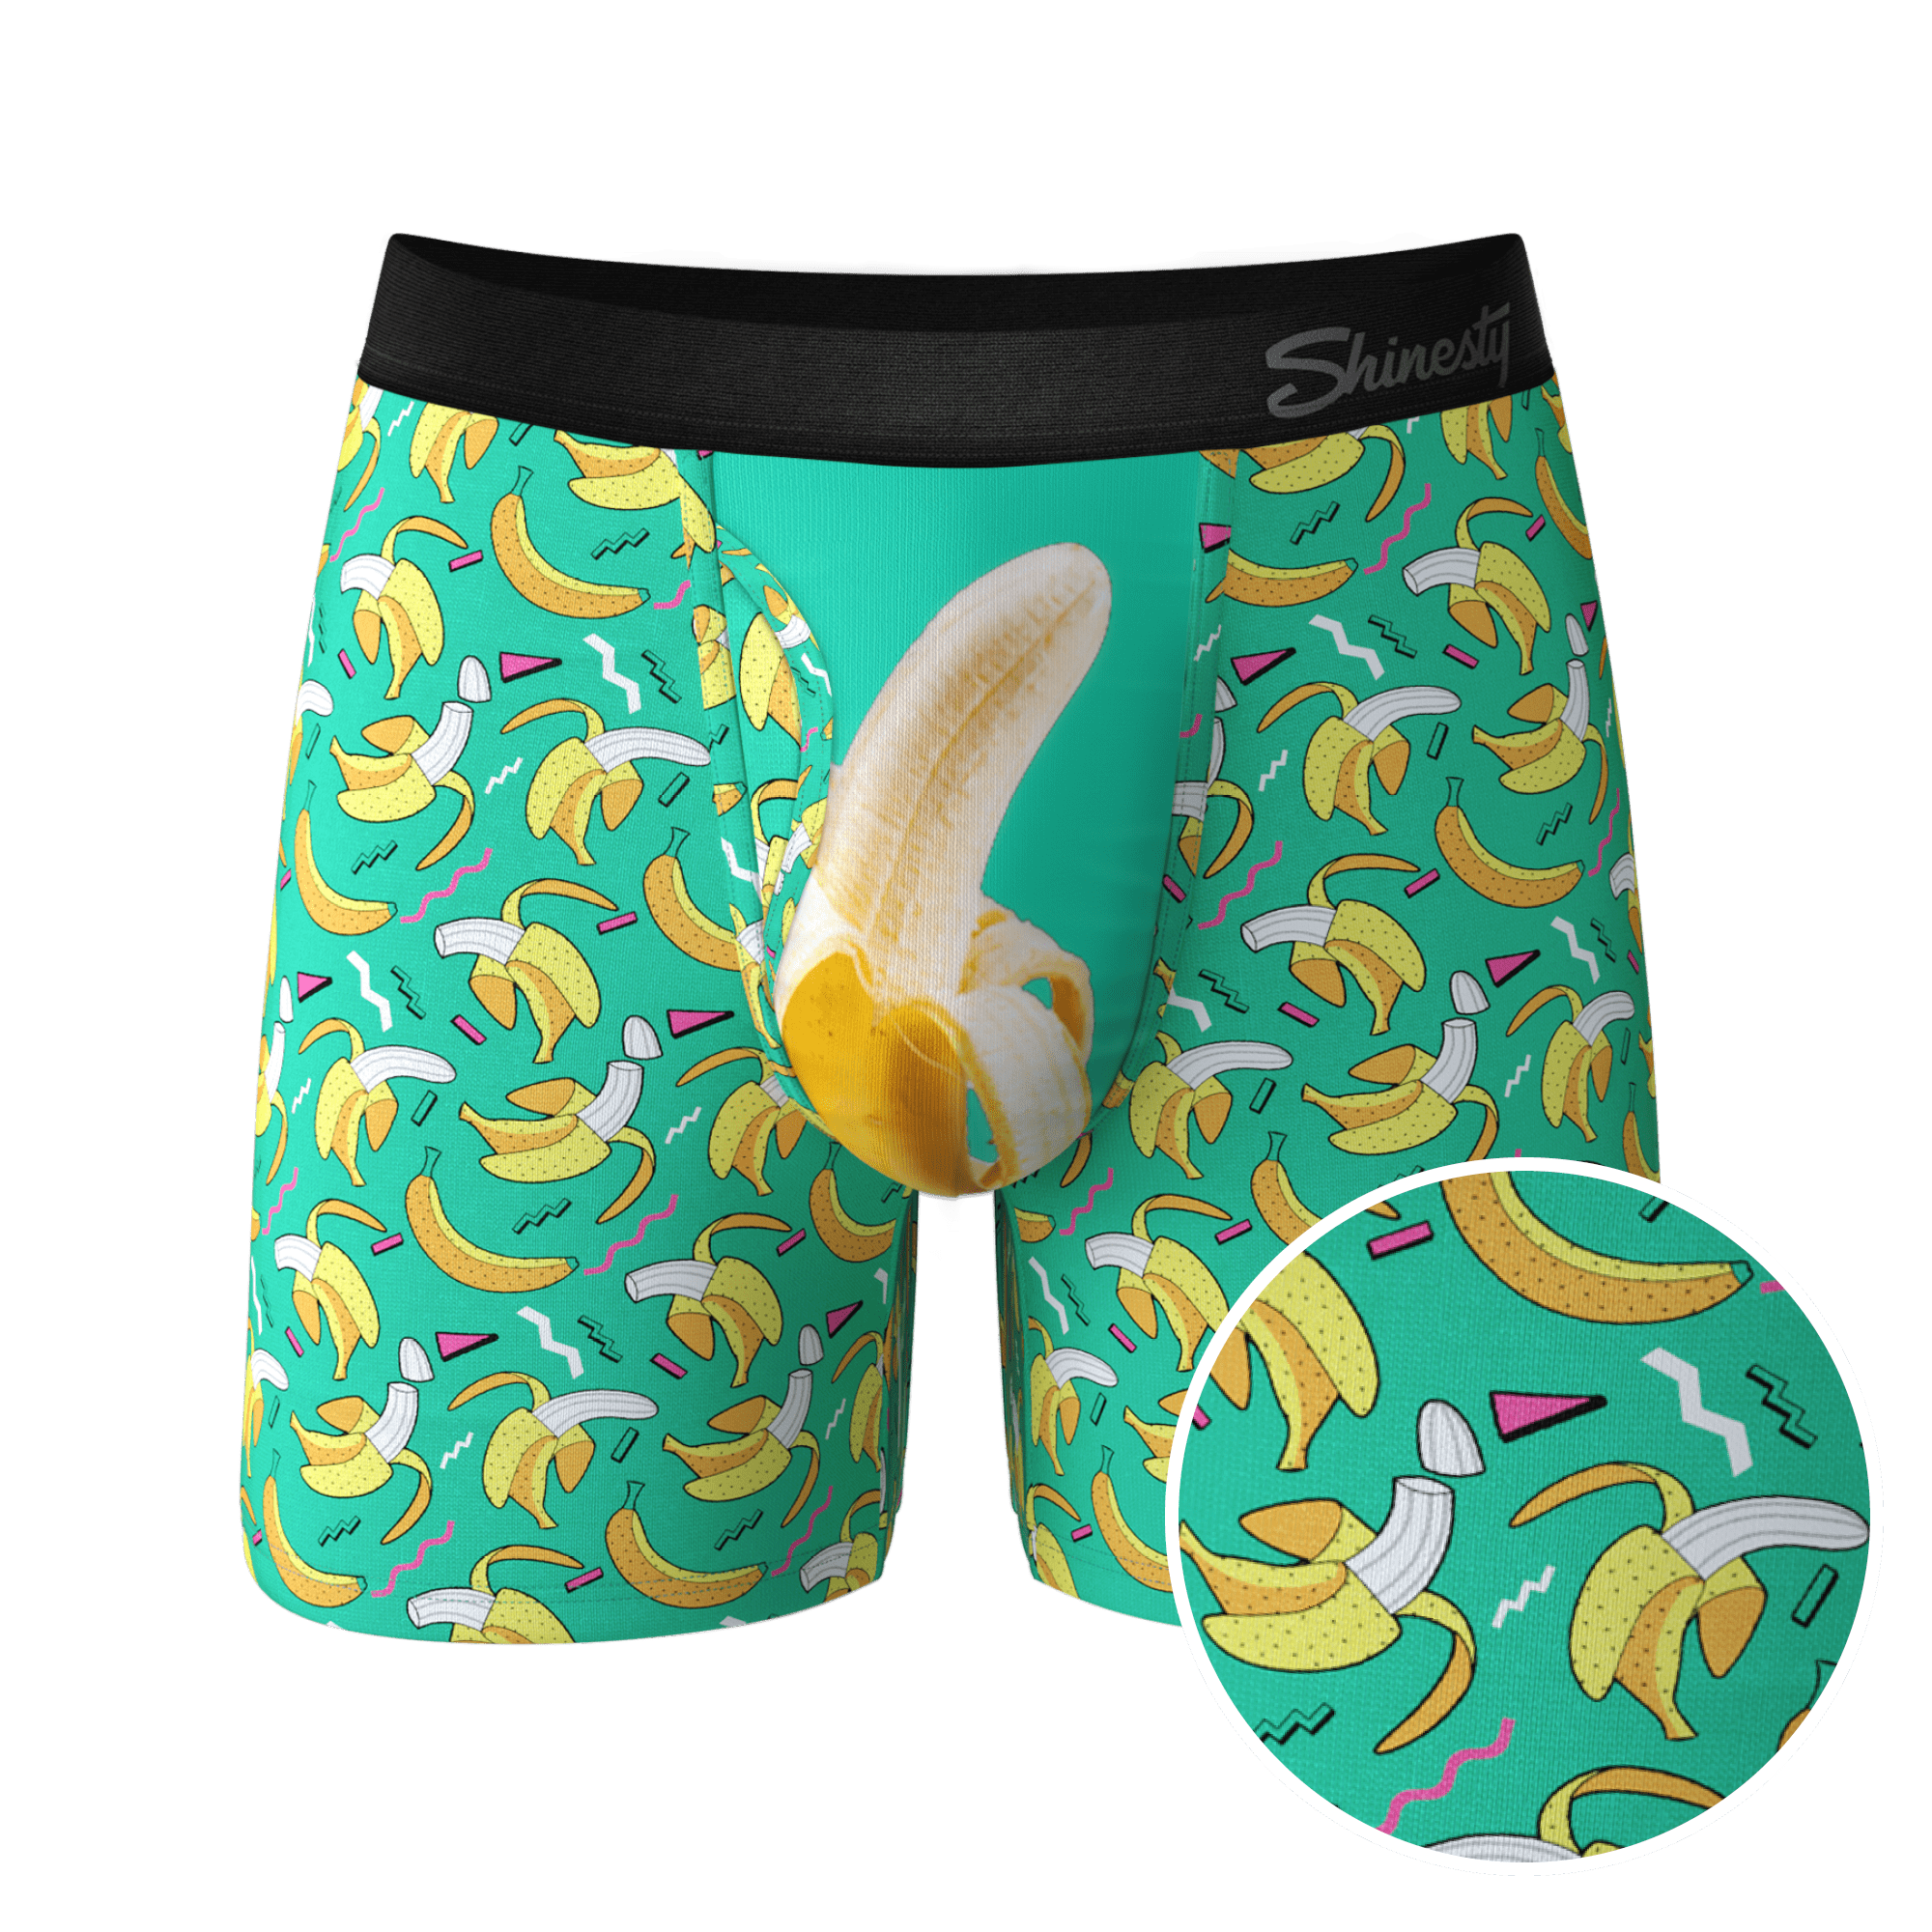 The Peel Deal - Shinesty Retro Banana Ball Hammock Pouch Underwear With Fly  Large